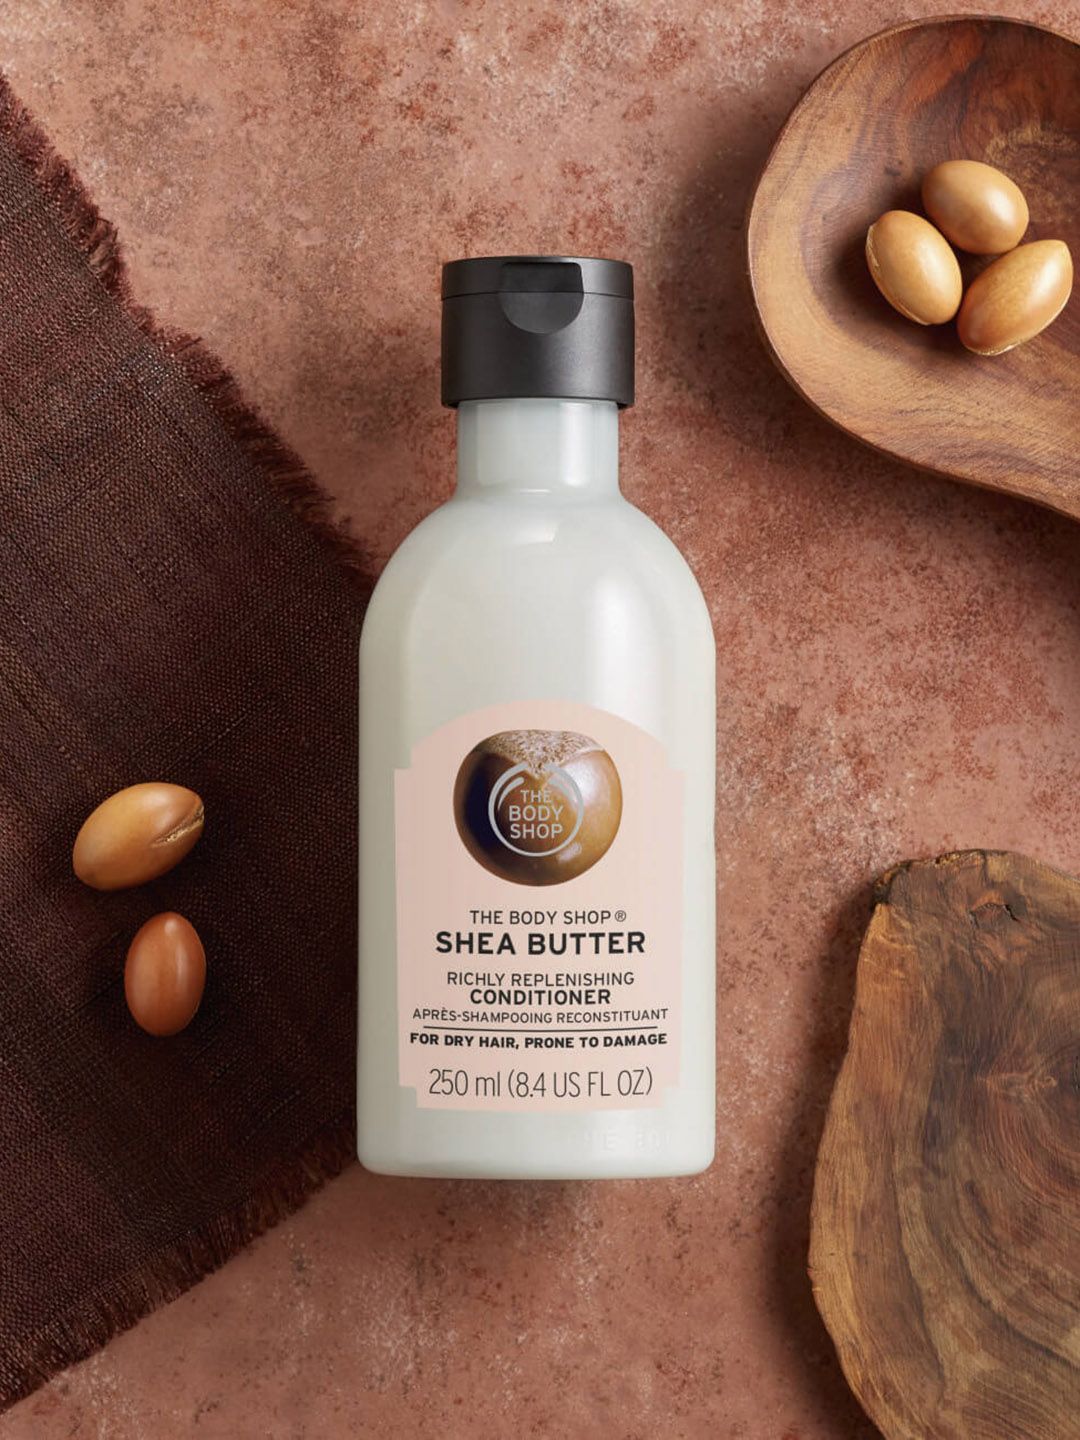 THE BODY SHOP Shea Butter Richly Replenishing Conditioner 250ml Price in India